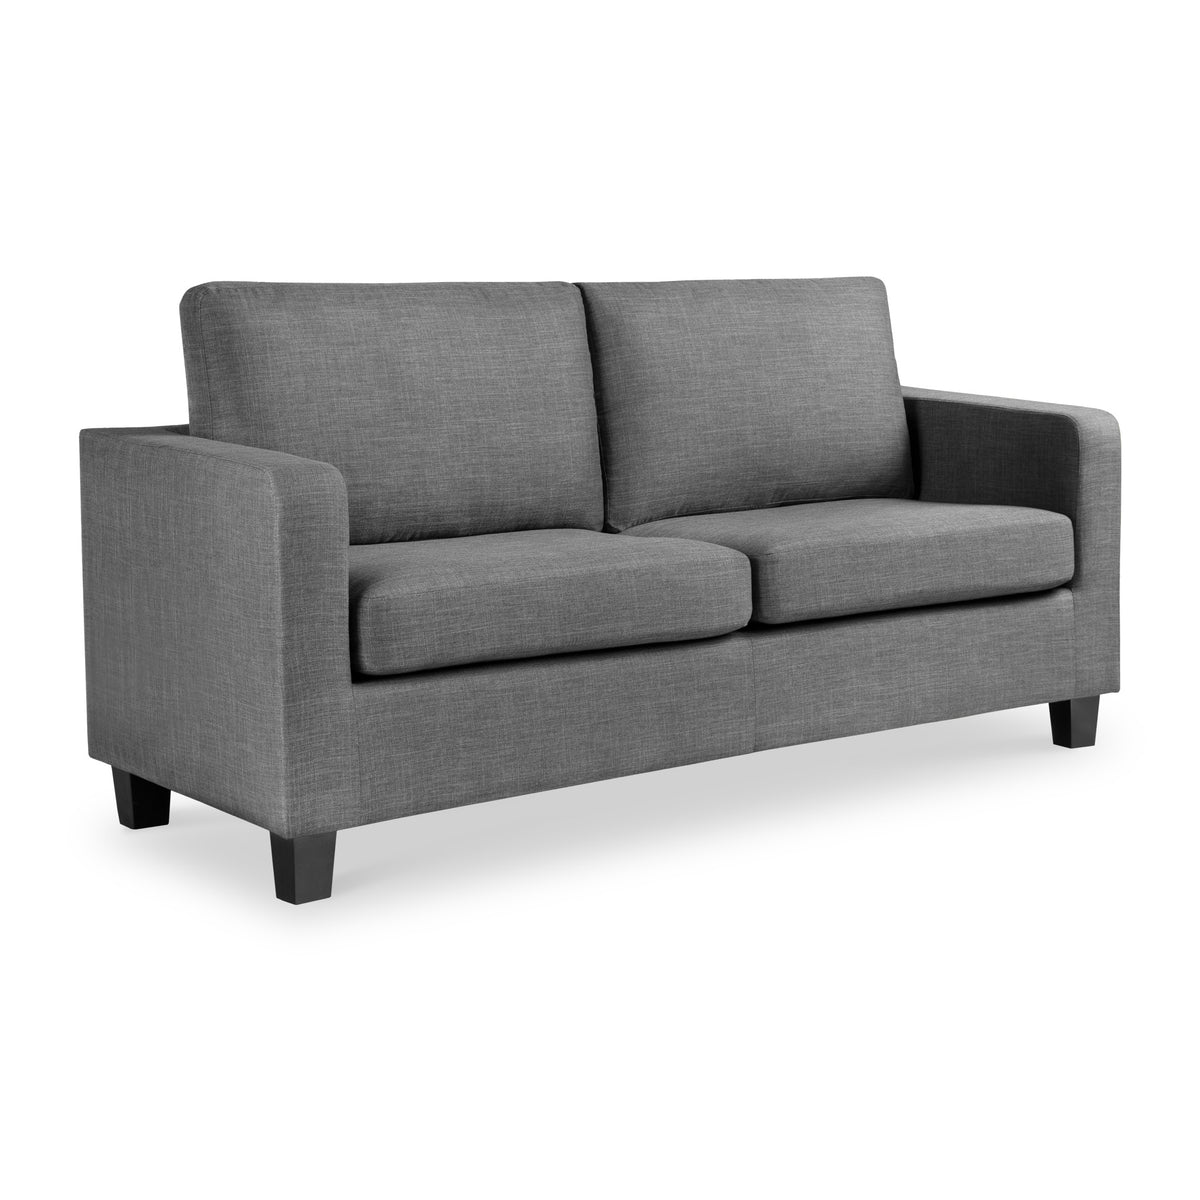 Myles Grey Fabric 3 Seater Sofa from Roseland Furniture